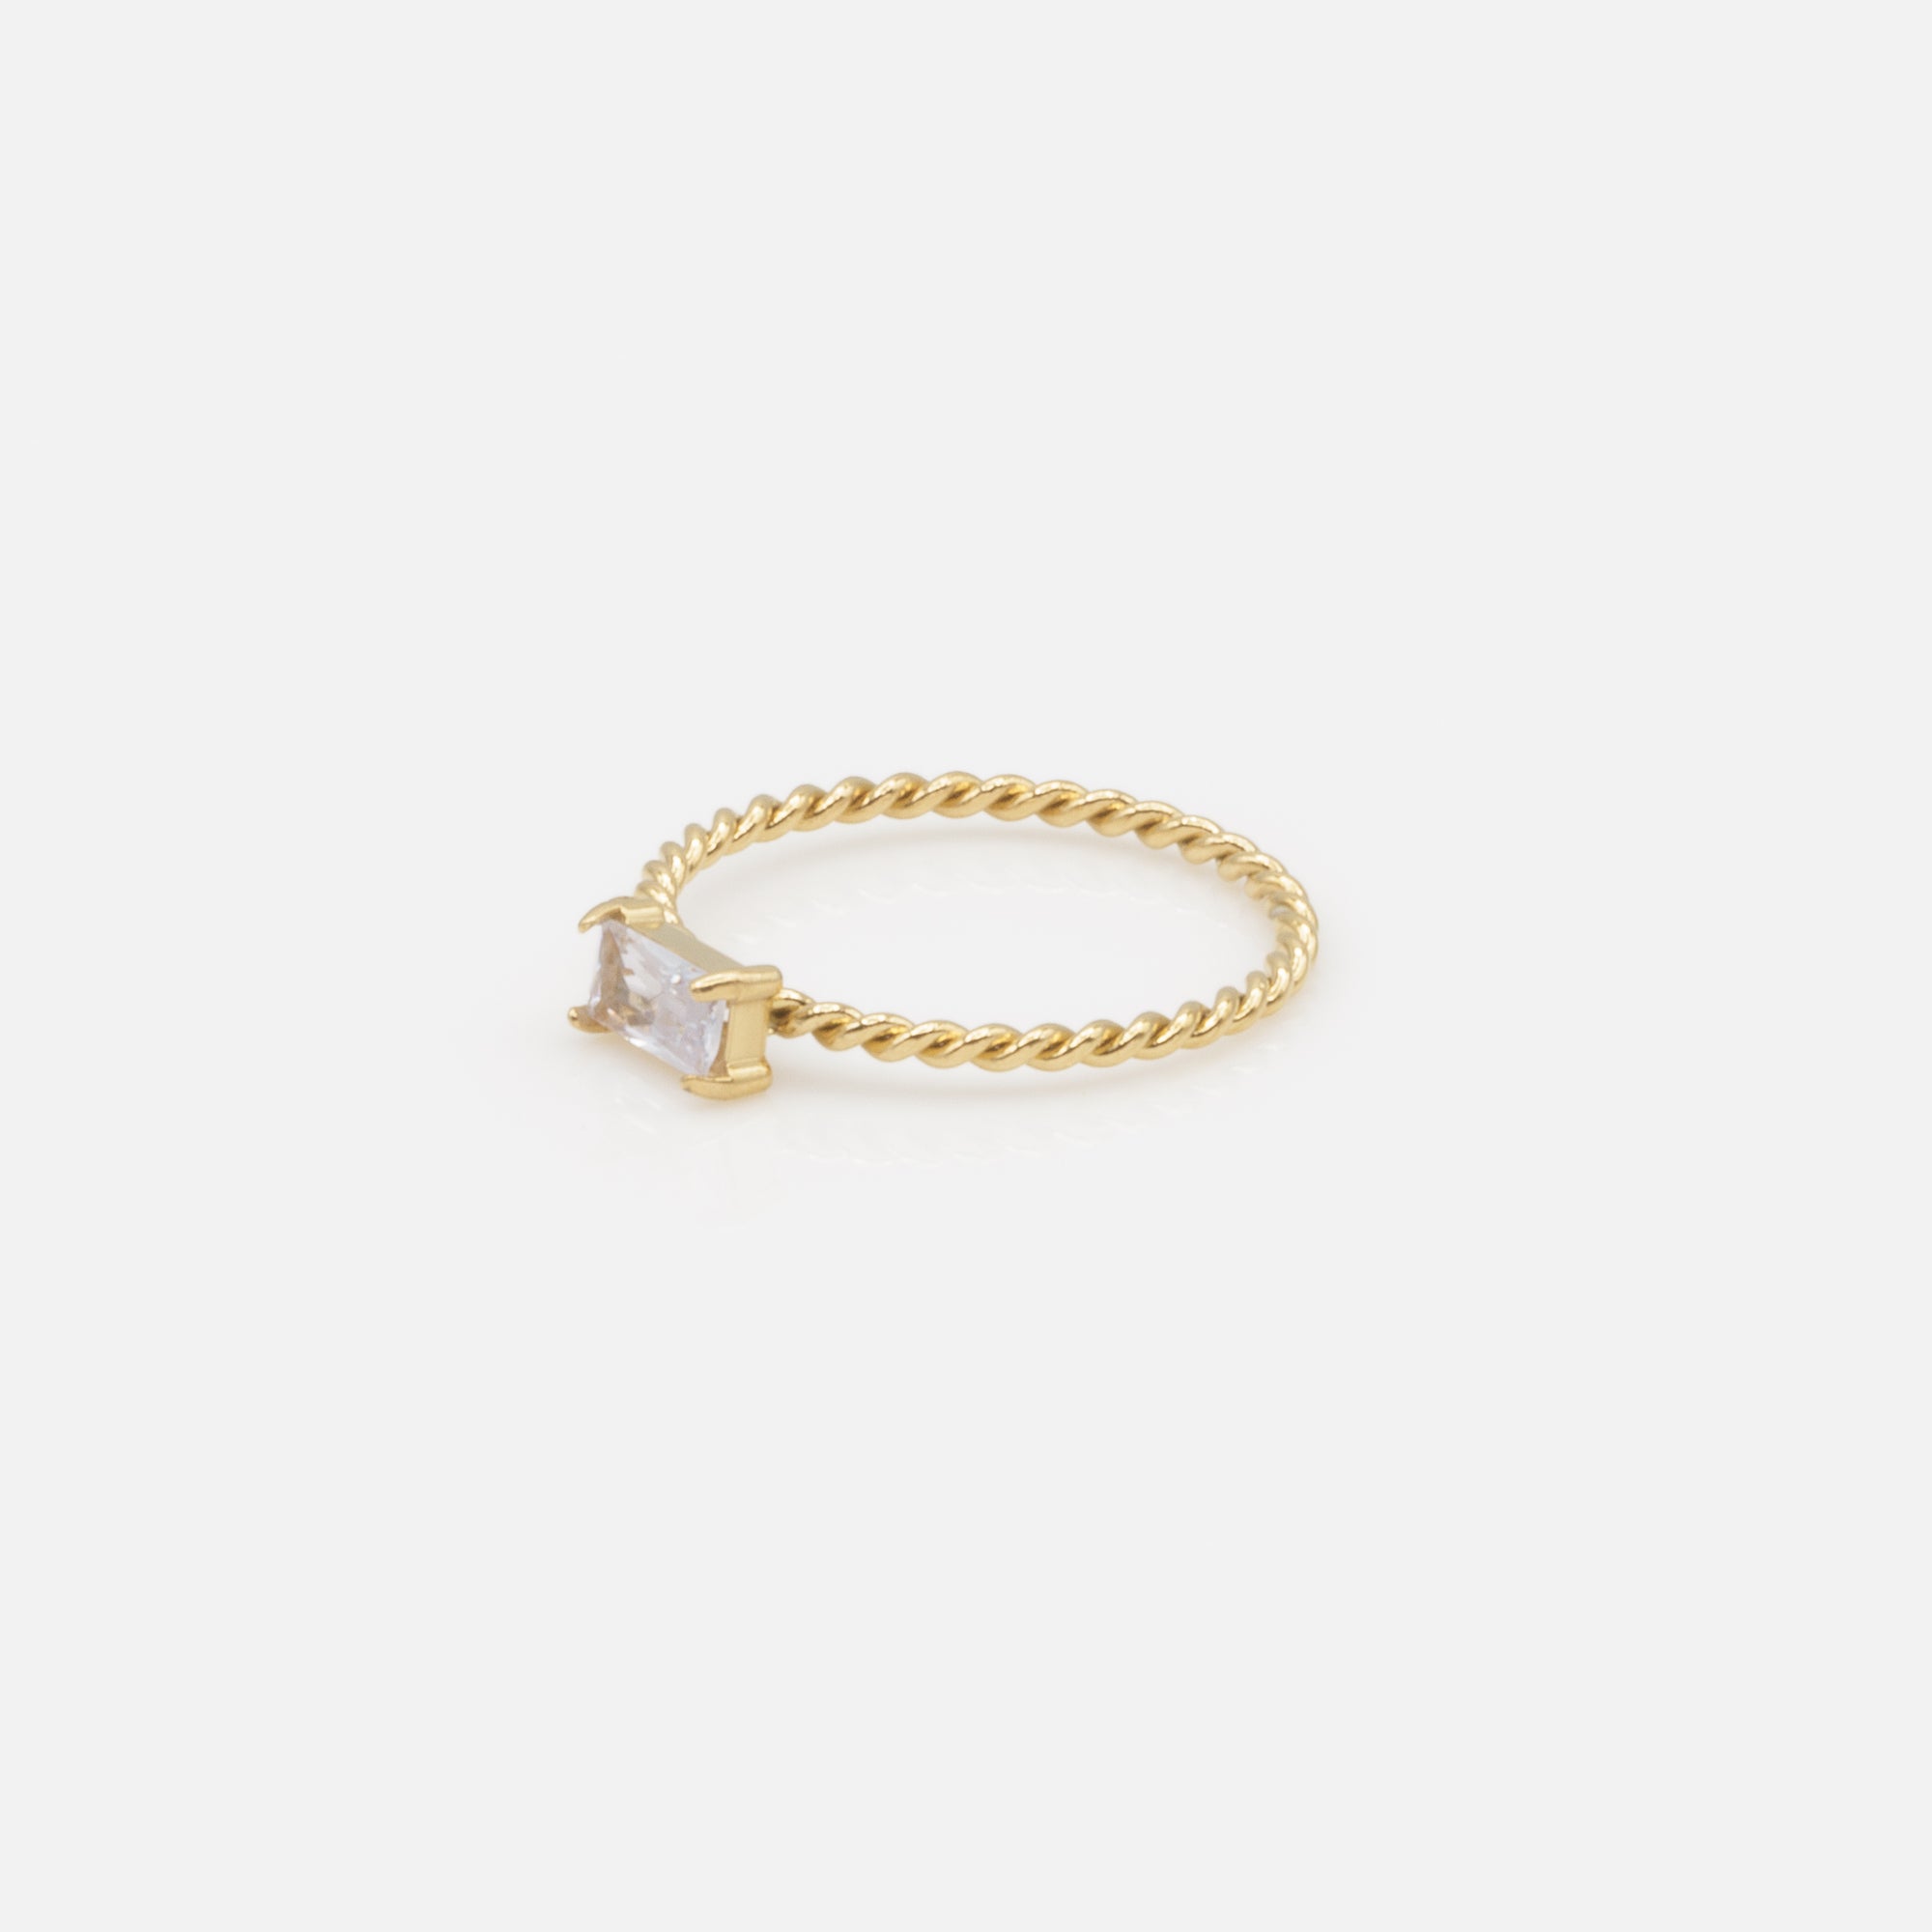 Twisted gold ring with rectangular stone in stainless steel